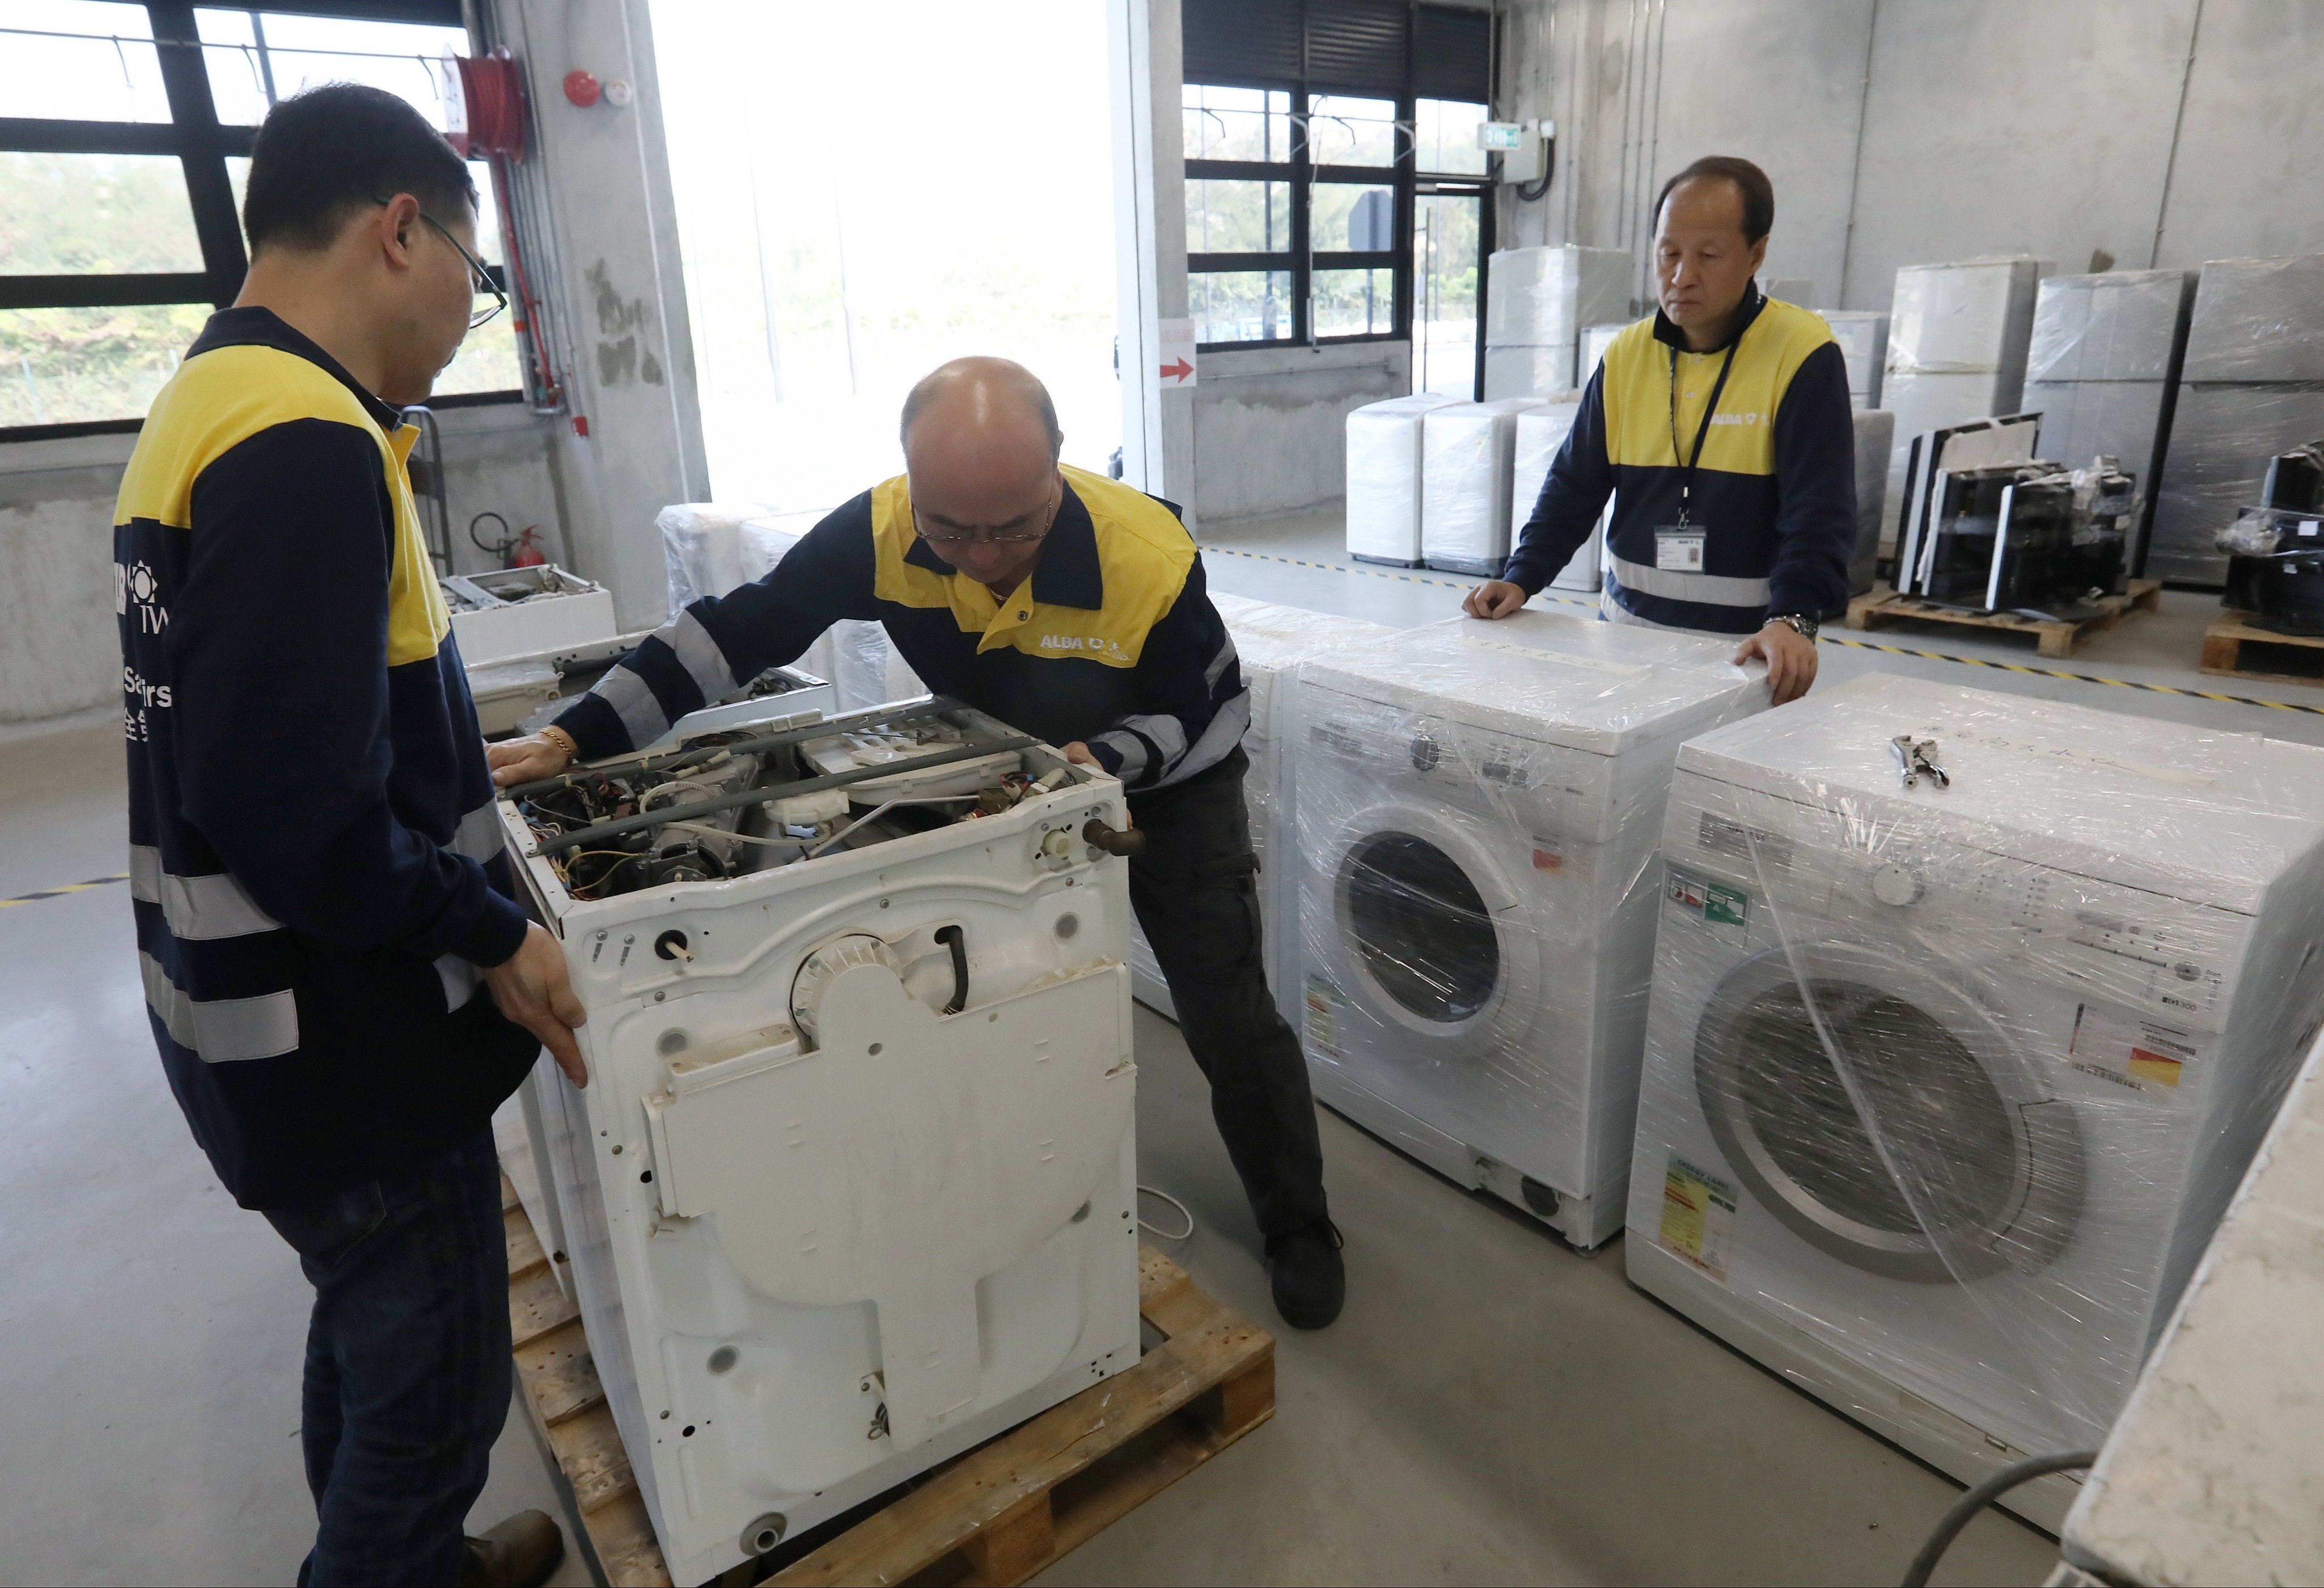 Staff at the recycling plant working on discarded washing machines. Photo: Edward Wong